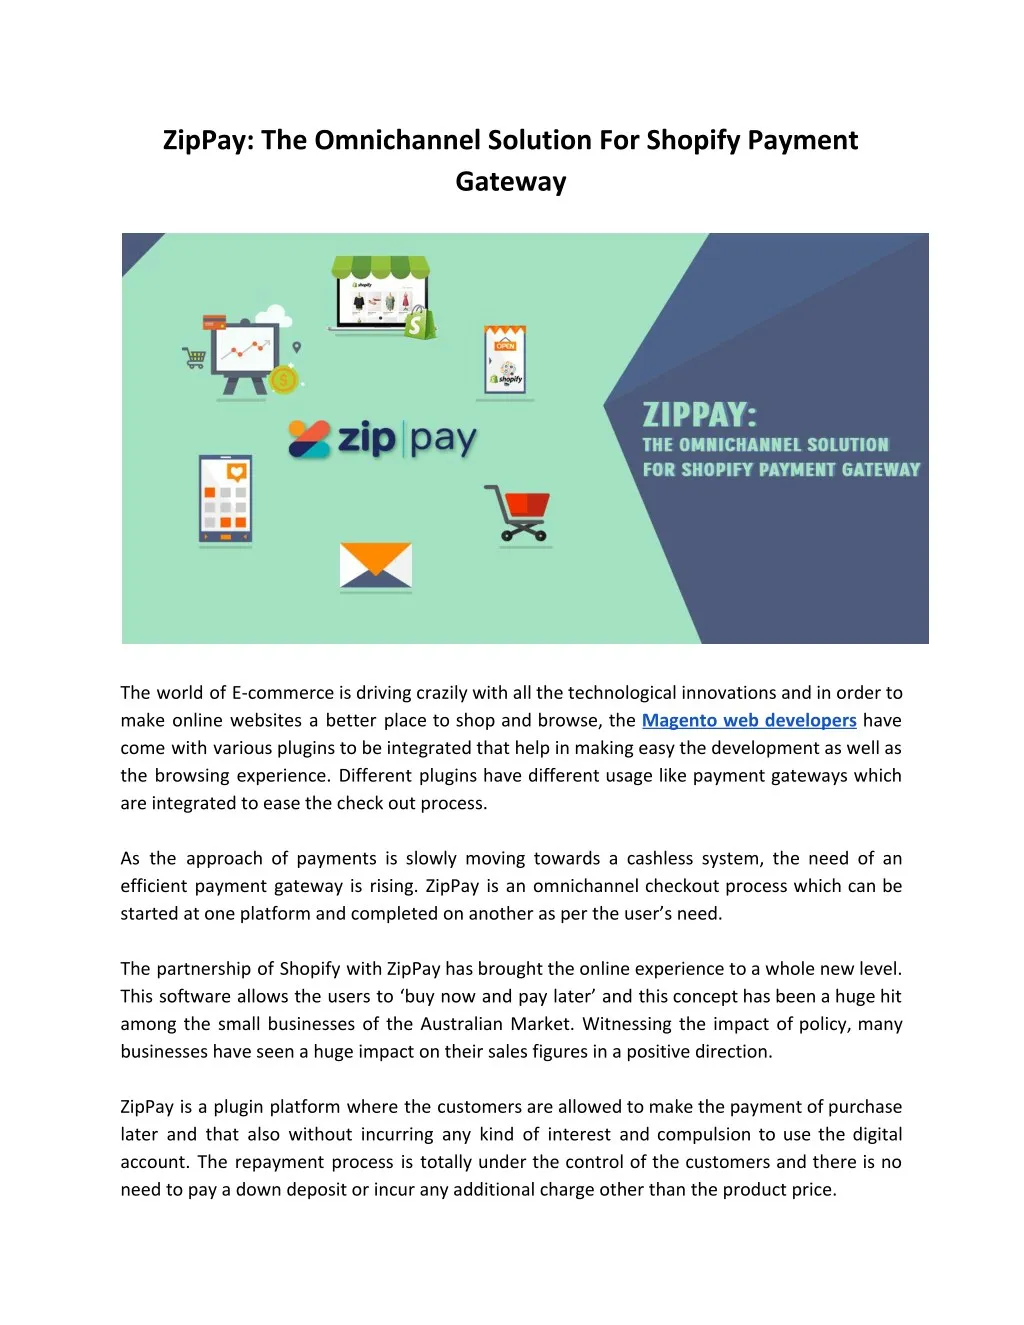 zippay the omnichannel solution for shopify